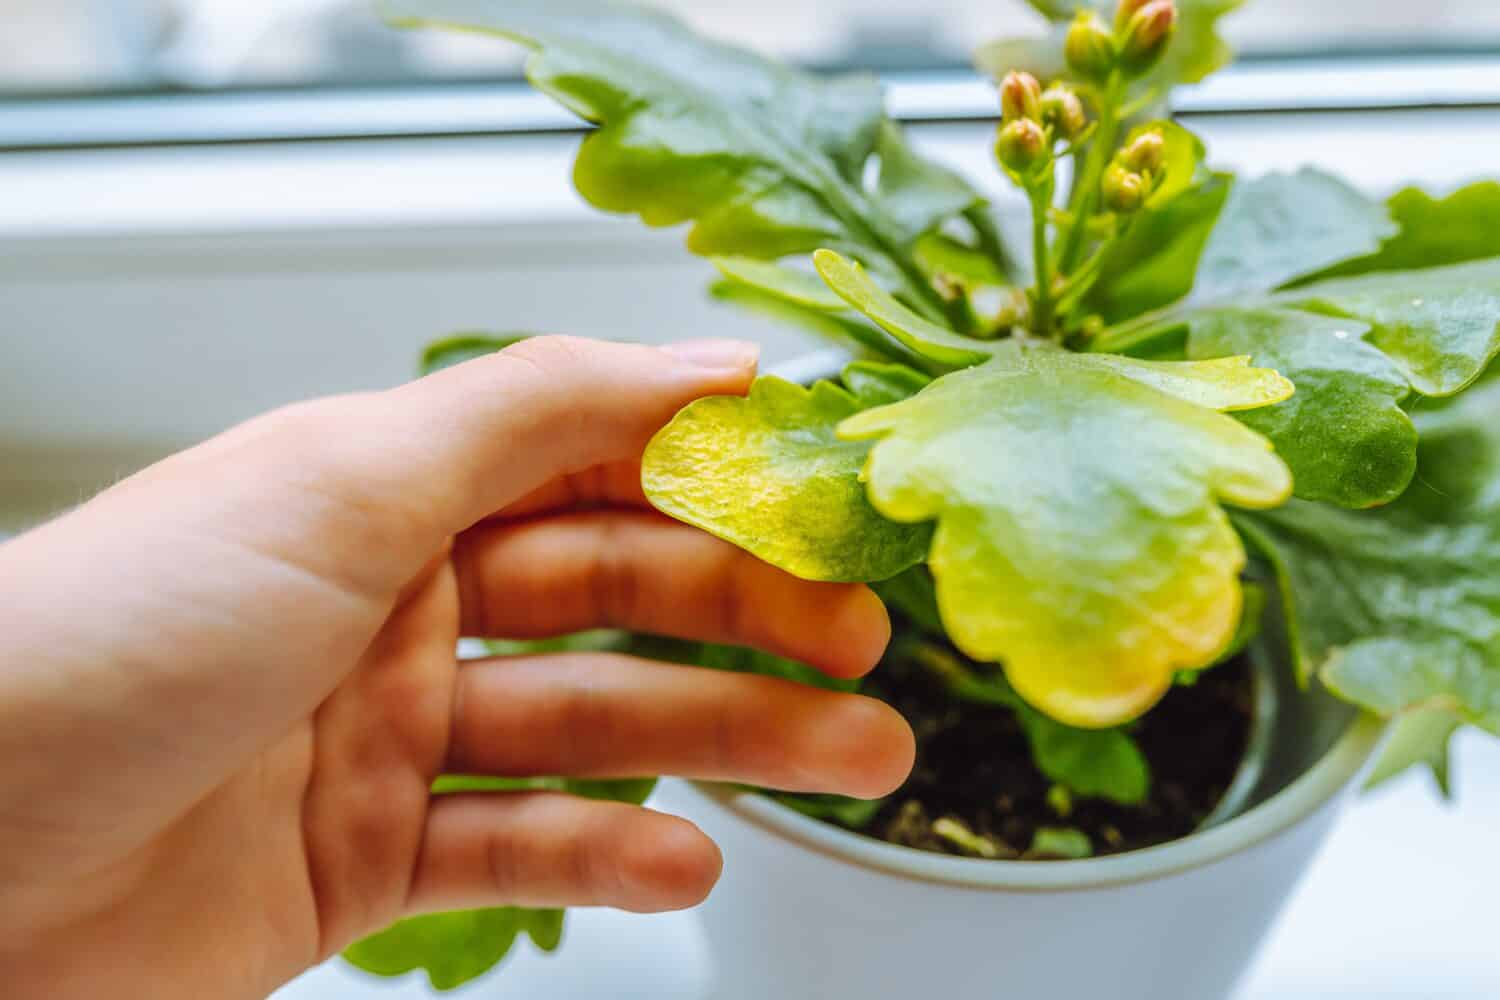 woman's hand shows yellow withered leaves of home plant in Kalanchoe flowerpot. Houseplant care, flower disease control, insect pests that kill potted flowers